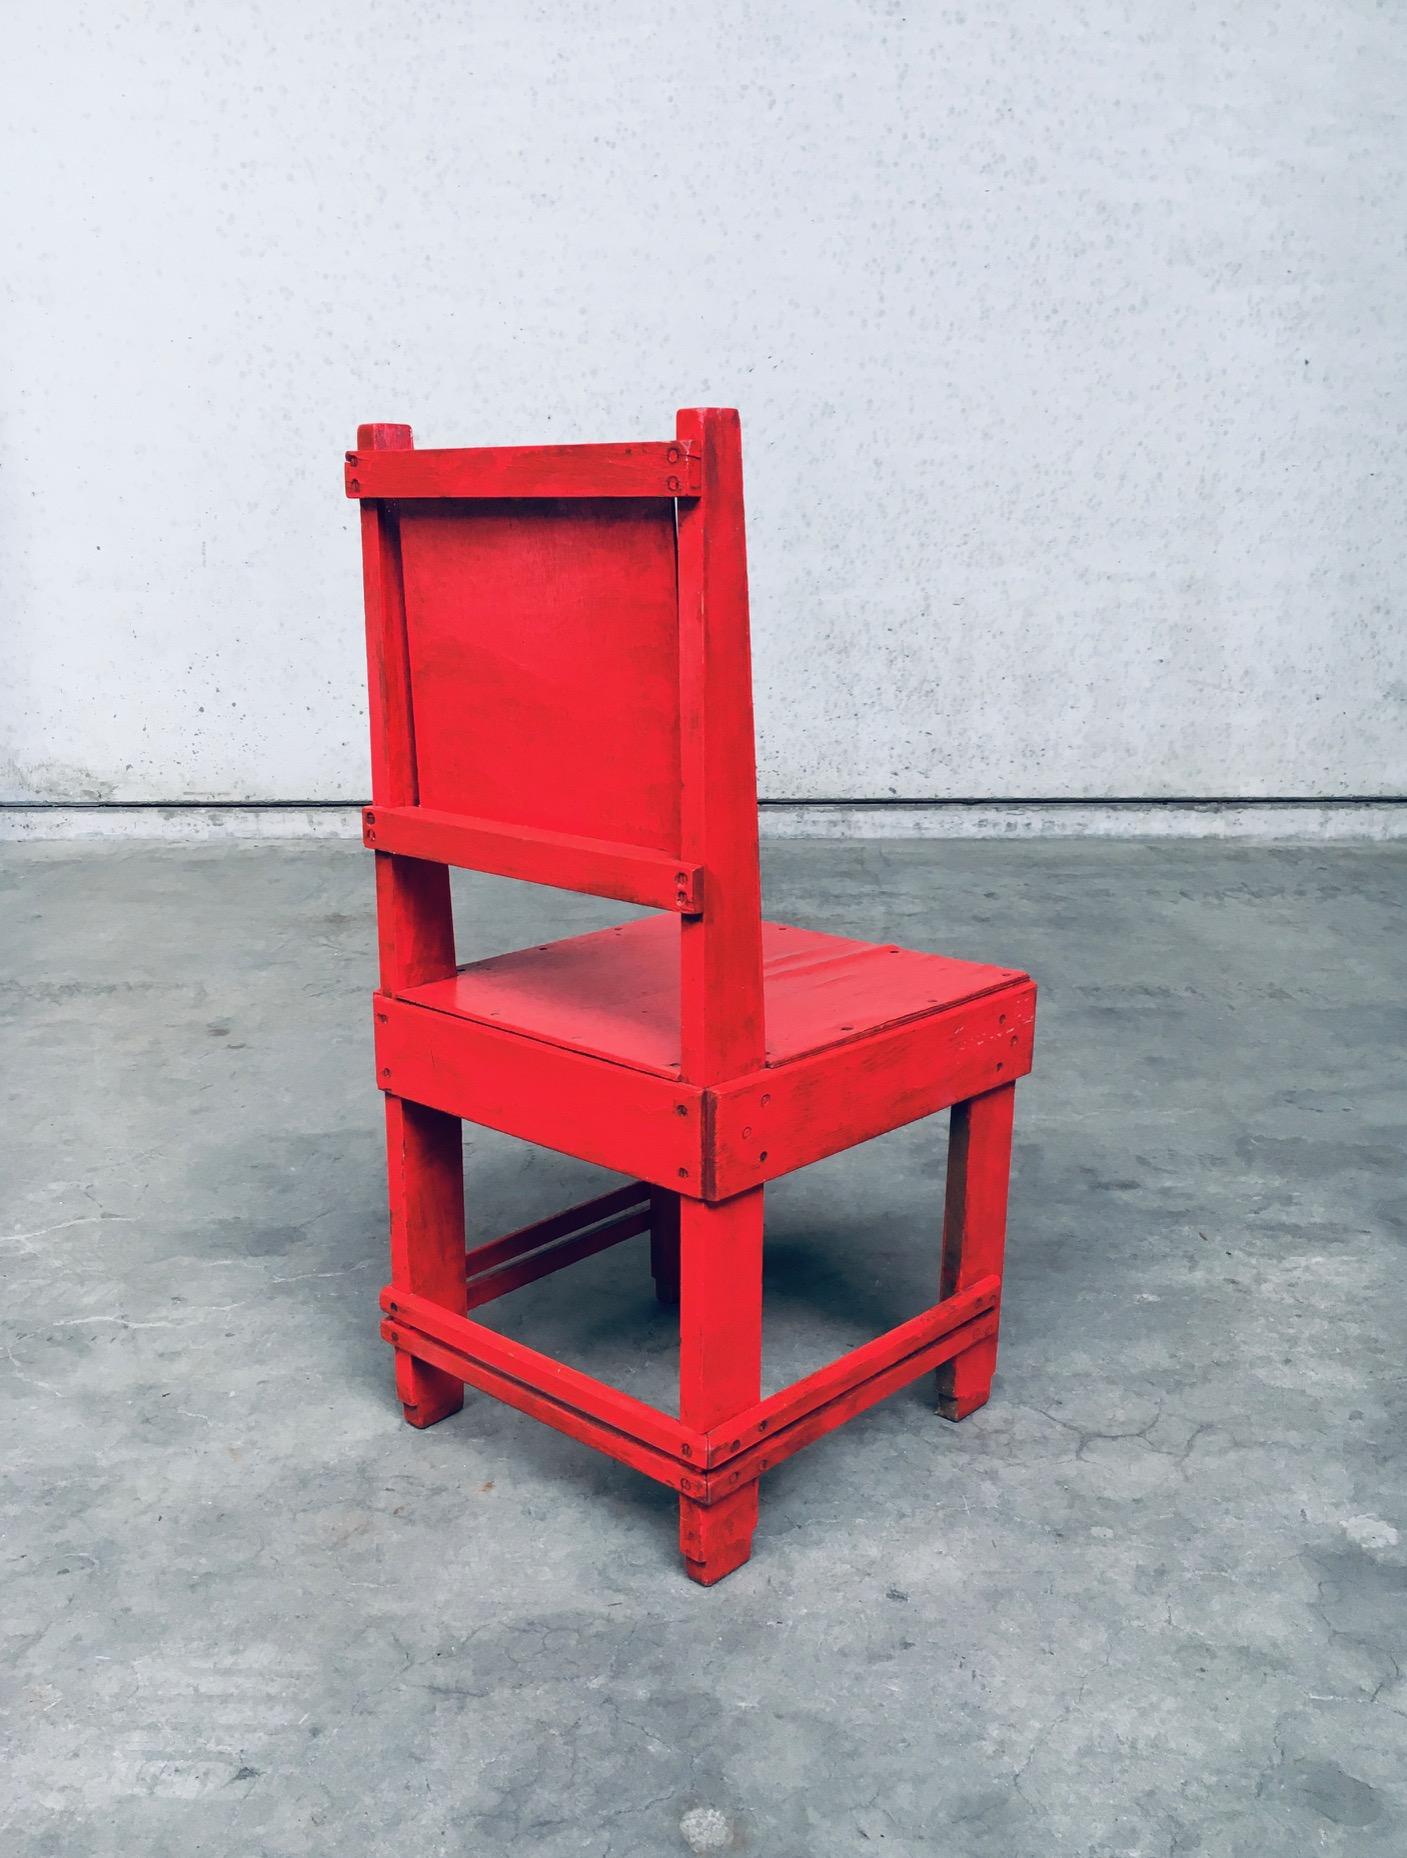 De Stijl Movement Design Red Chair Attributed to Jan Wils, 1920's Netherlands For Sale 1